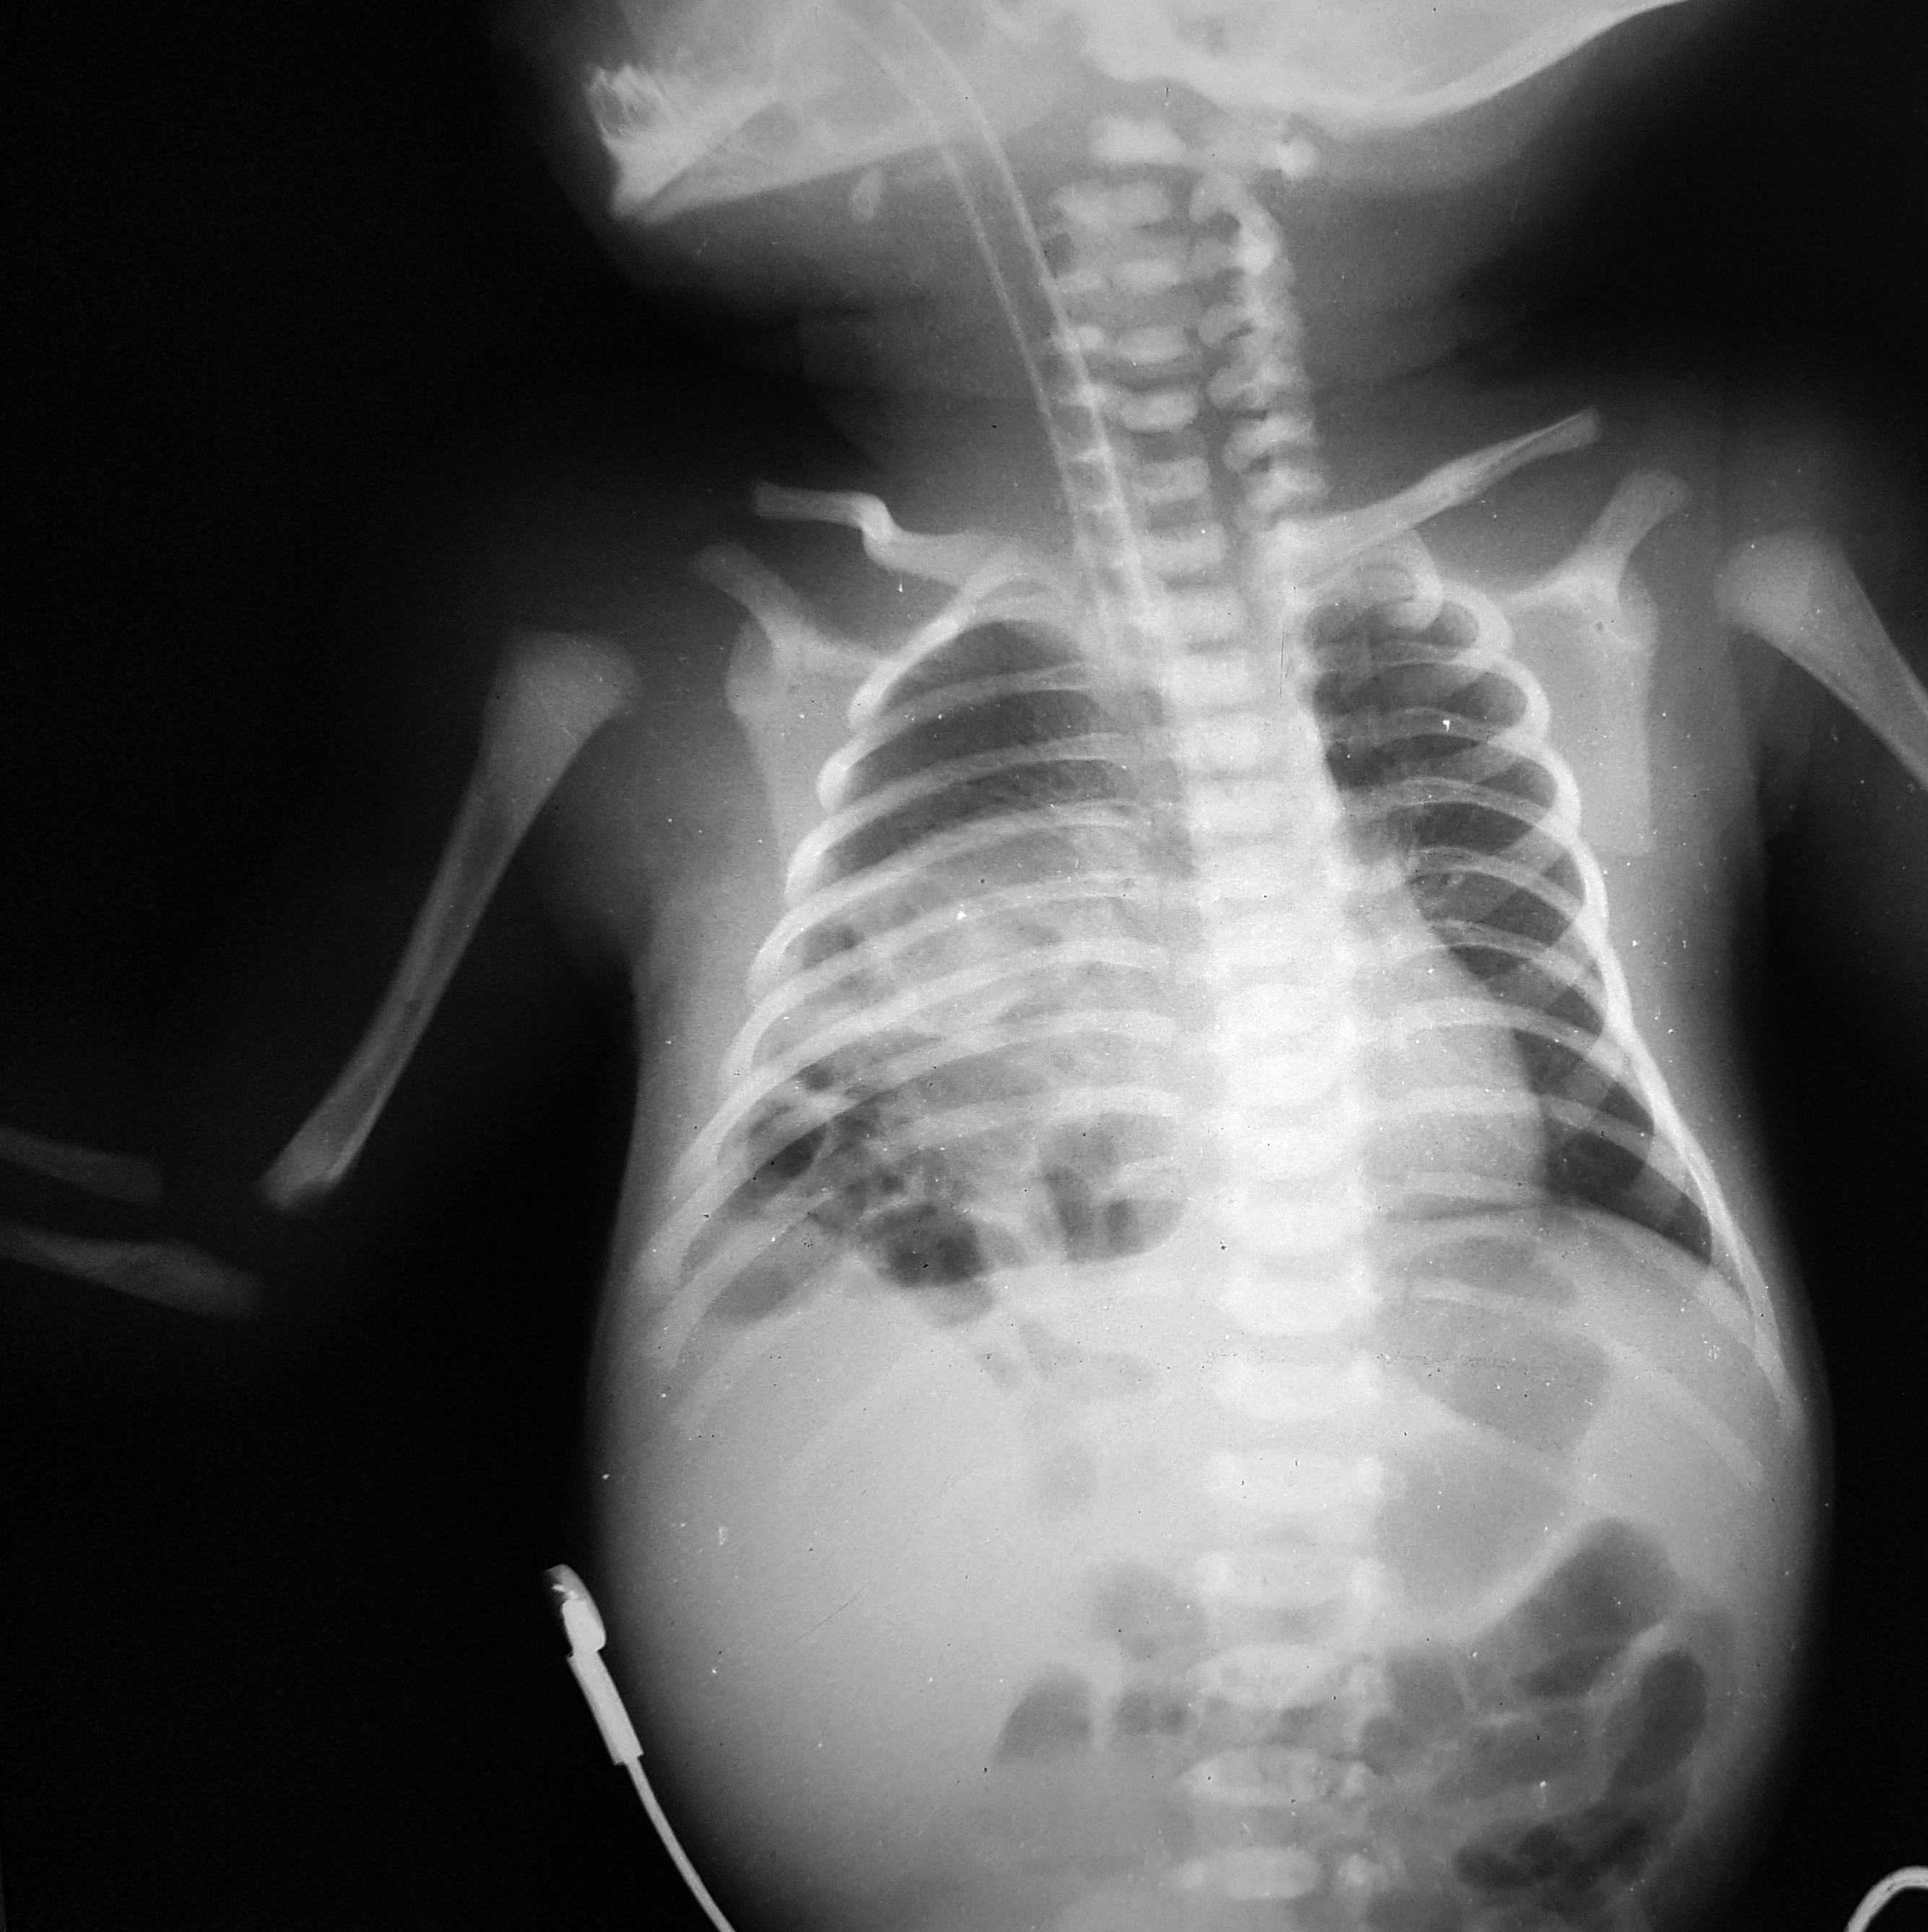 Figure 1B. Chest radiograph. The mediastinum is slightly shifted to the left. Few loops of intestine can be seen in the abdomen